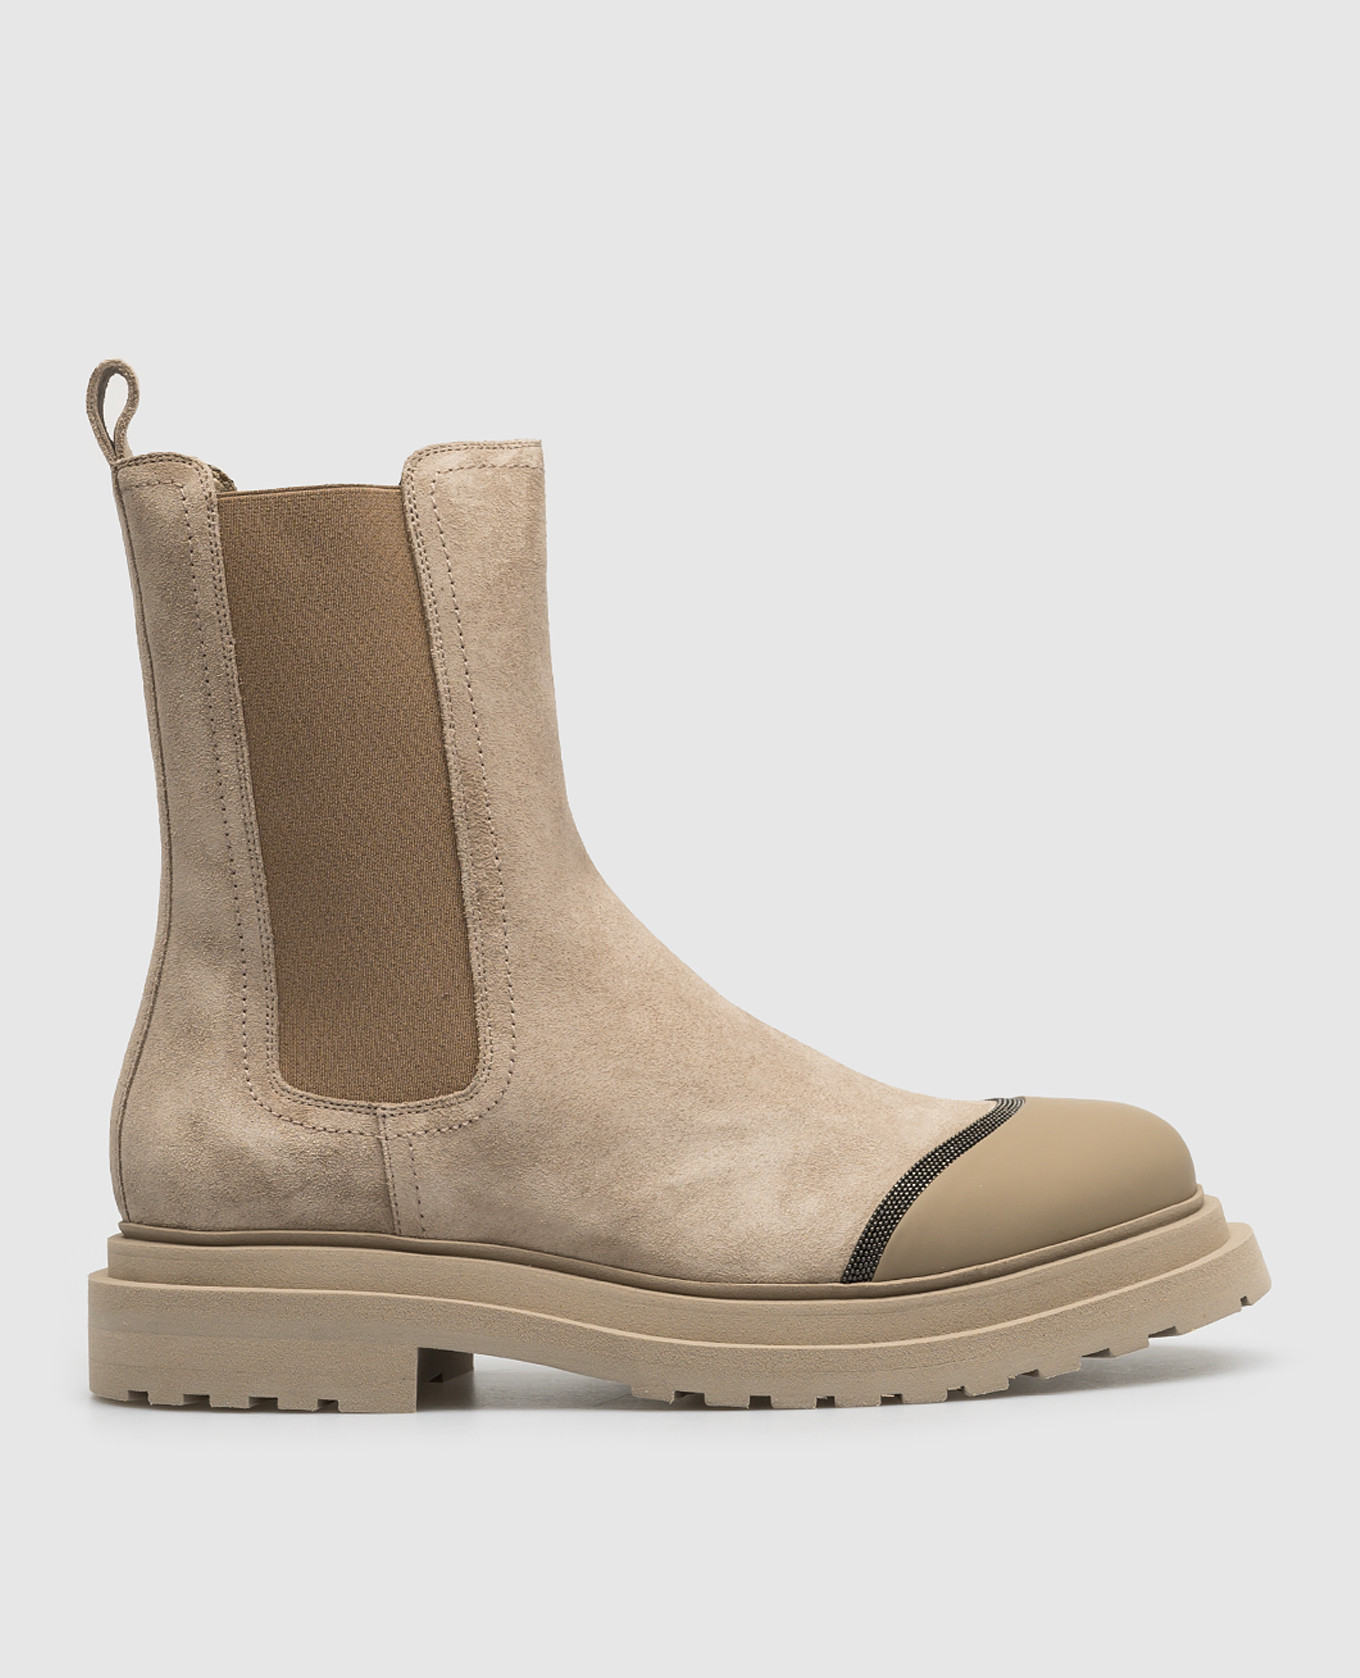 Beige suede chelsea boots with monil chain